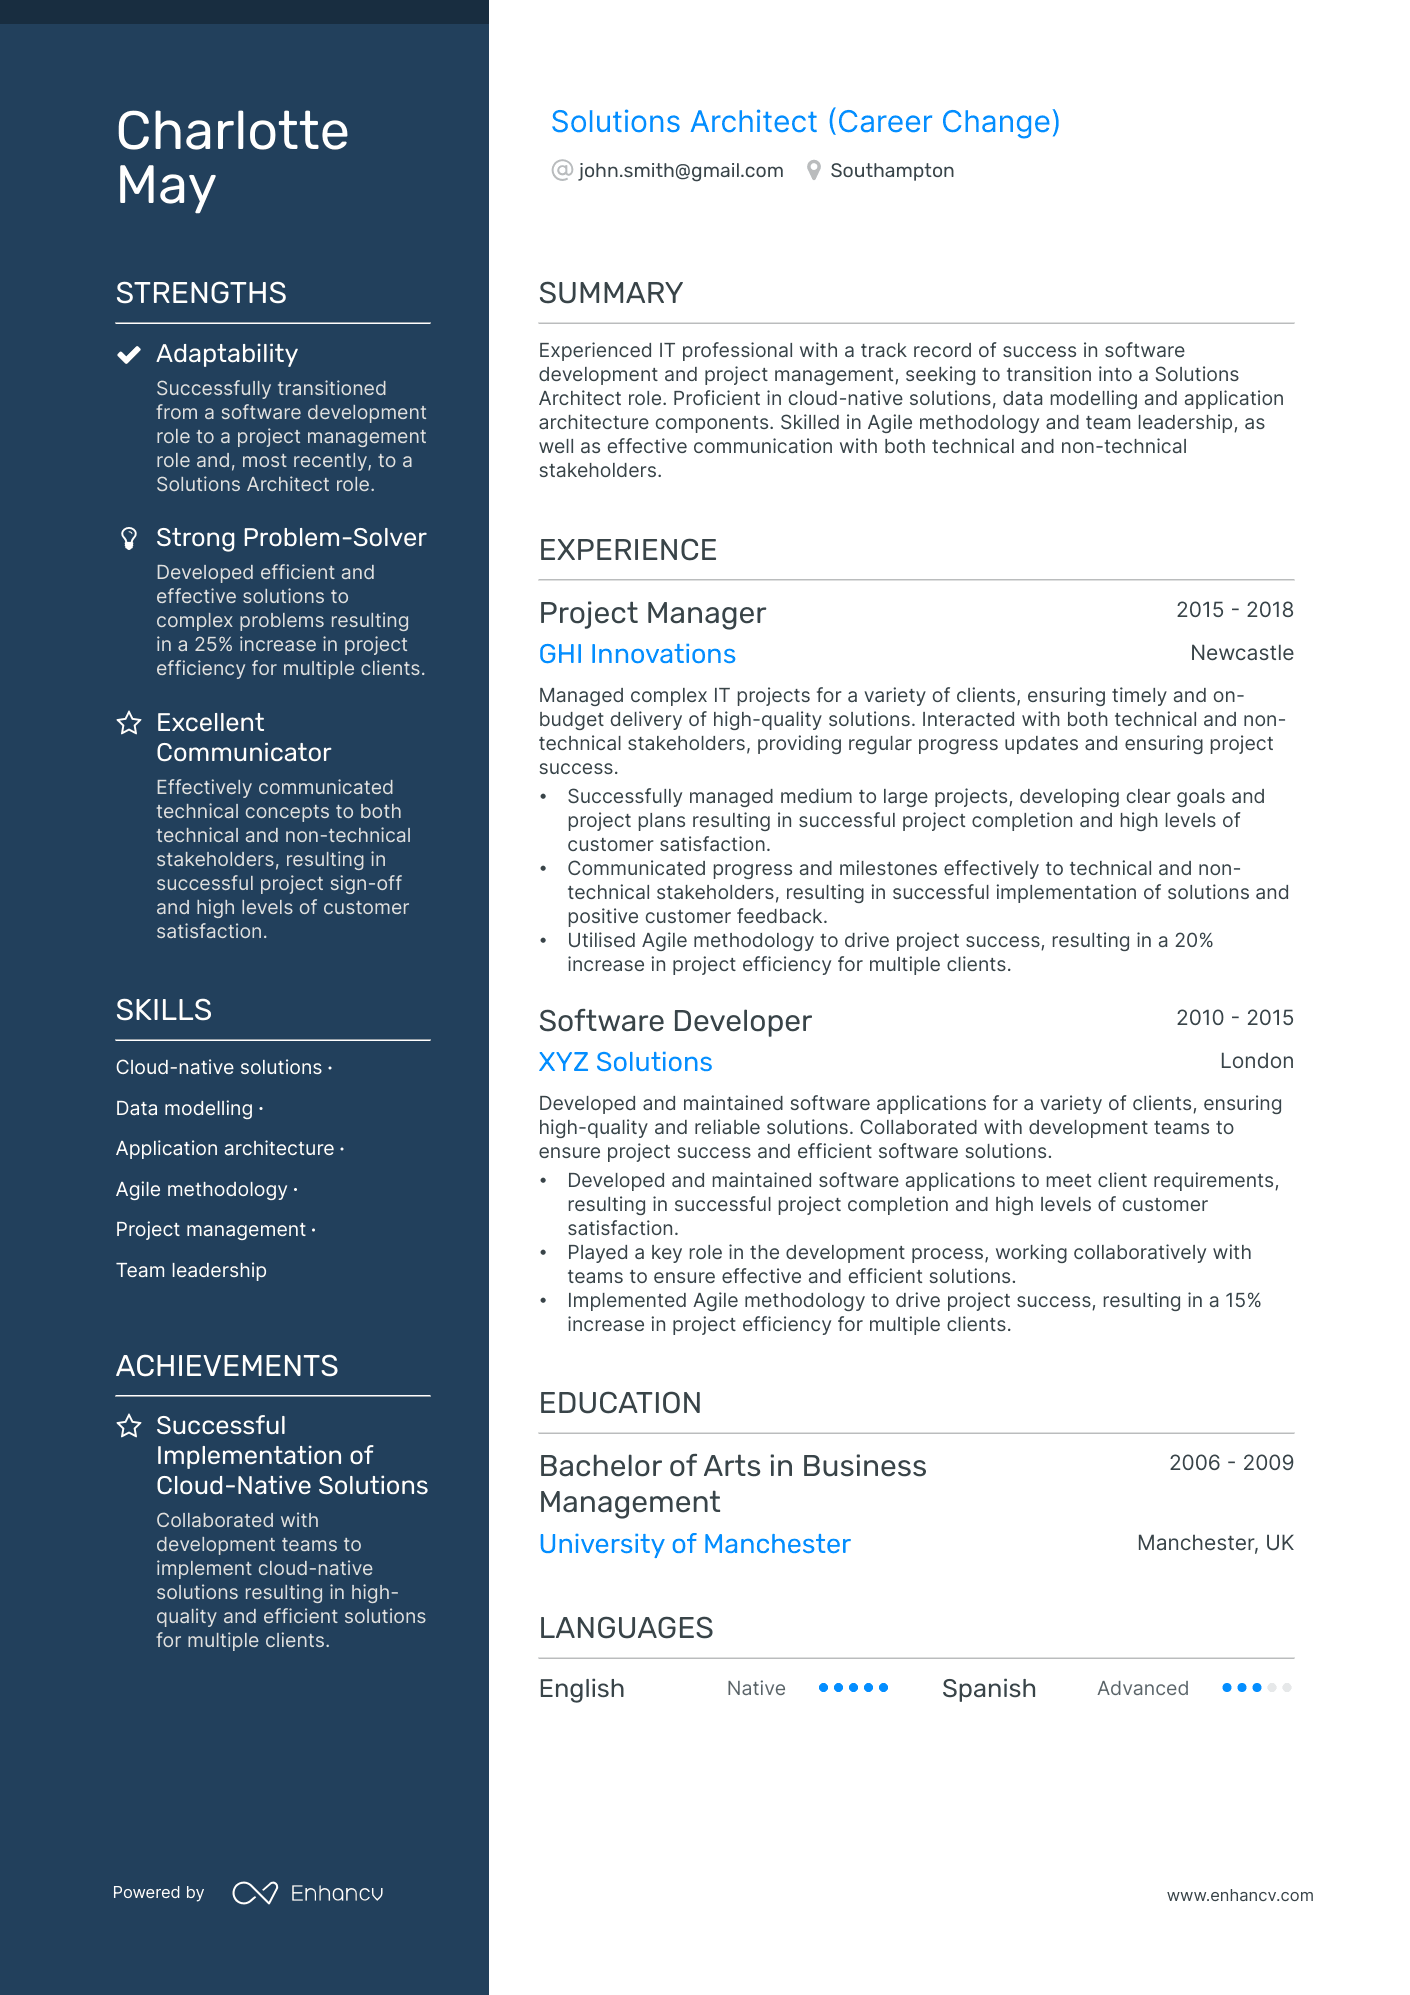 Solutions Architect (Career Change) CV example